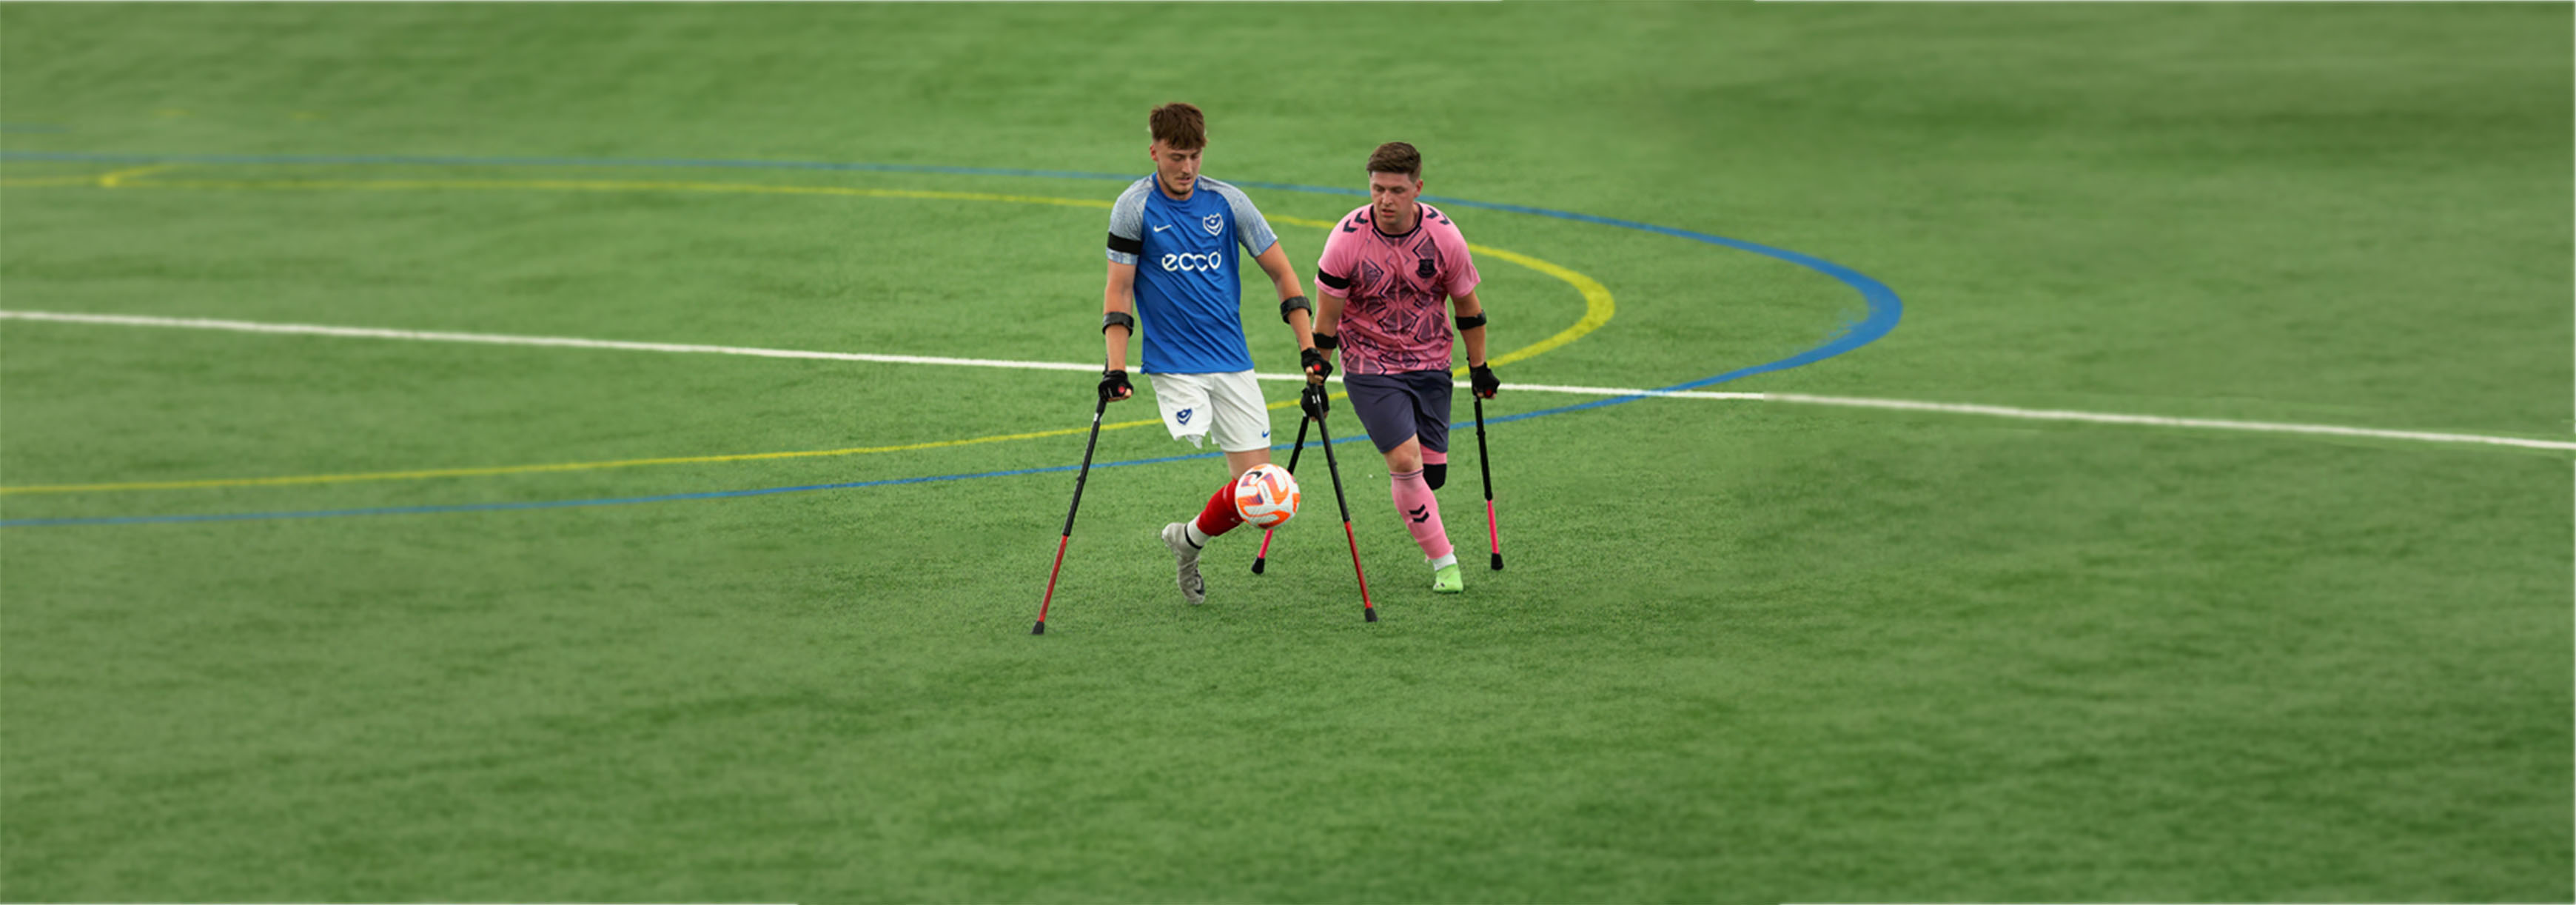 Two amputee players with crutches play football on an indoor 3G pitch.